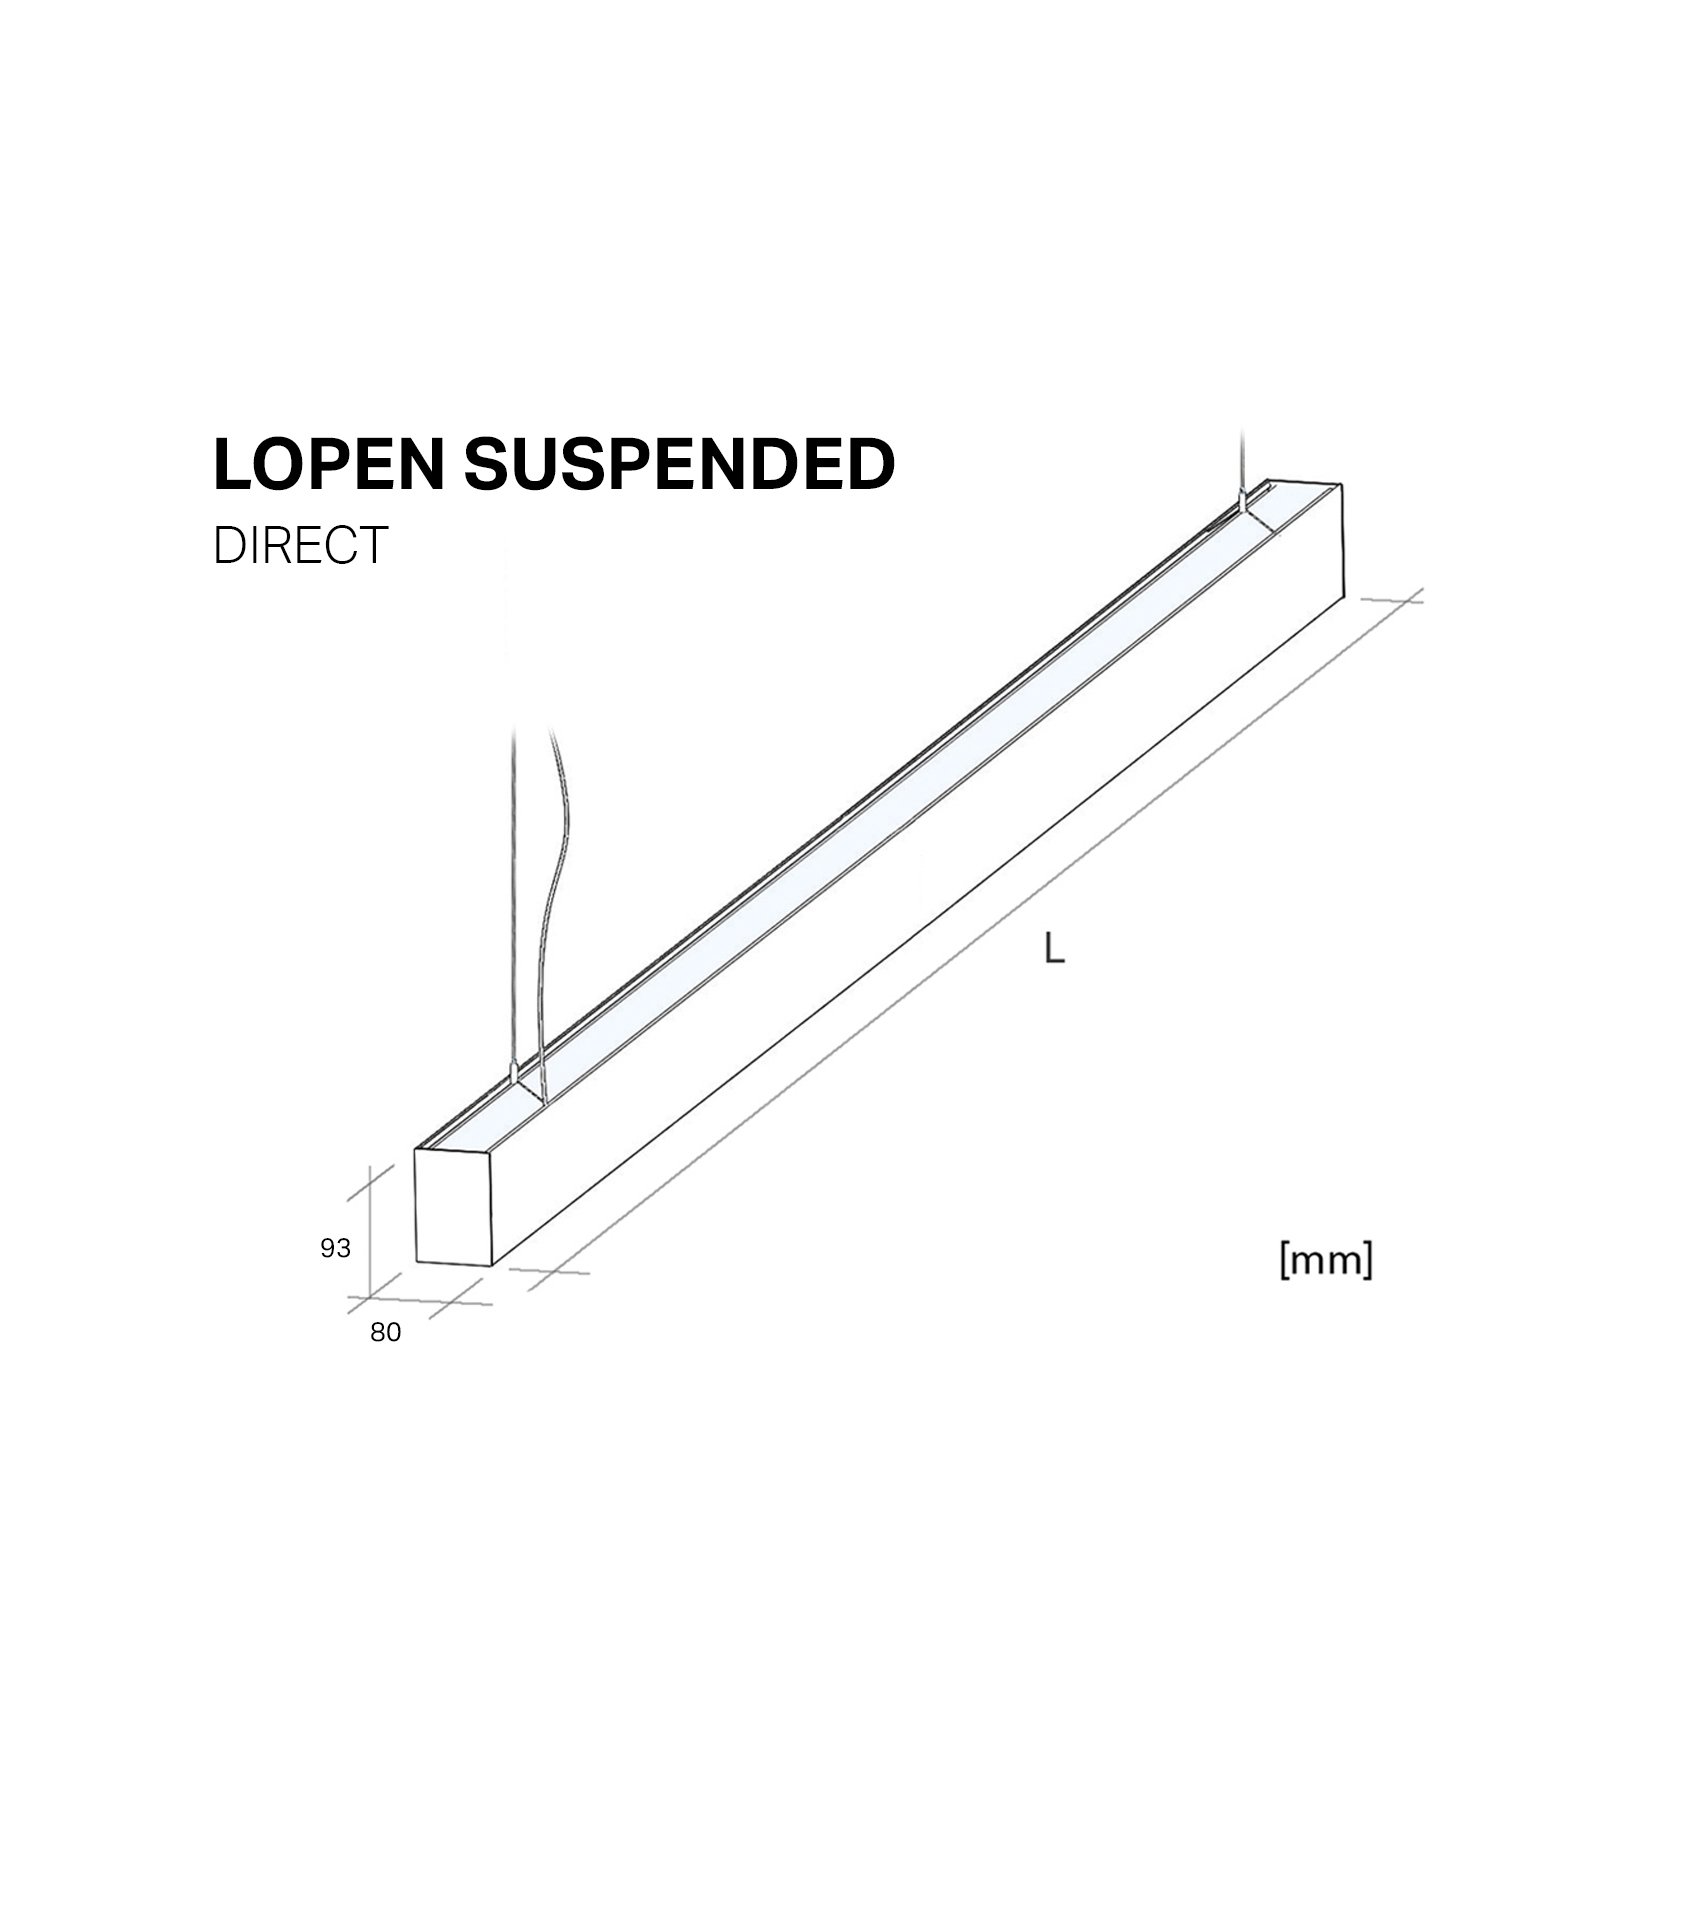 Lopen-suspended-technical-drawing